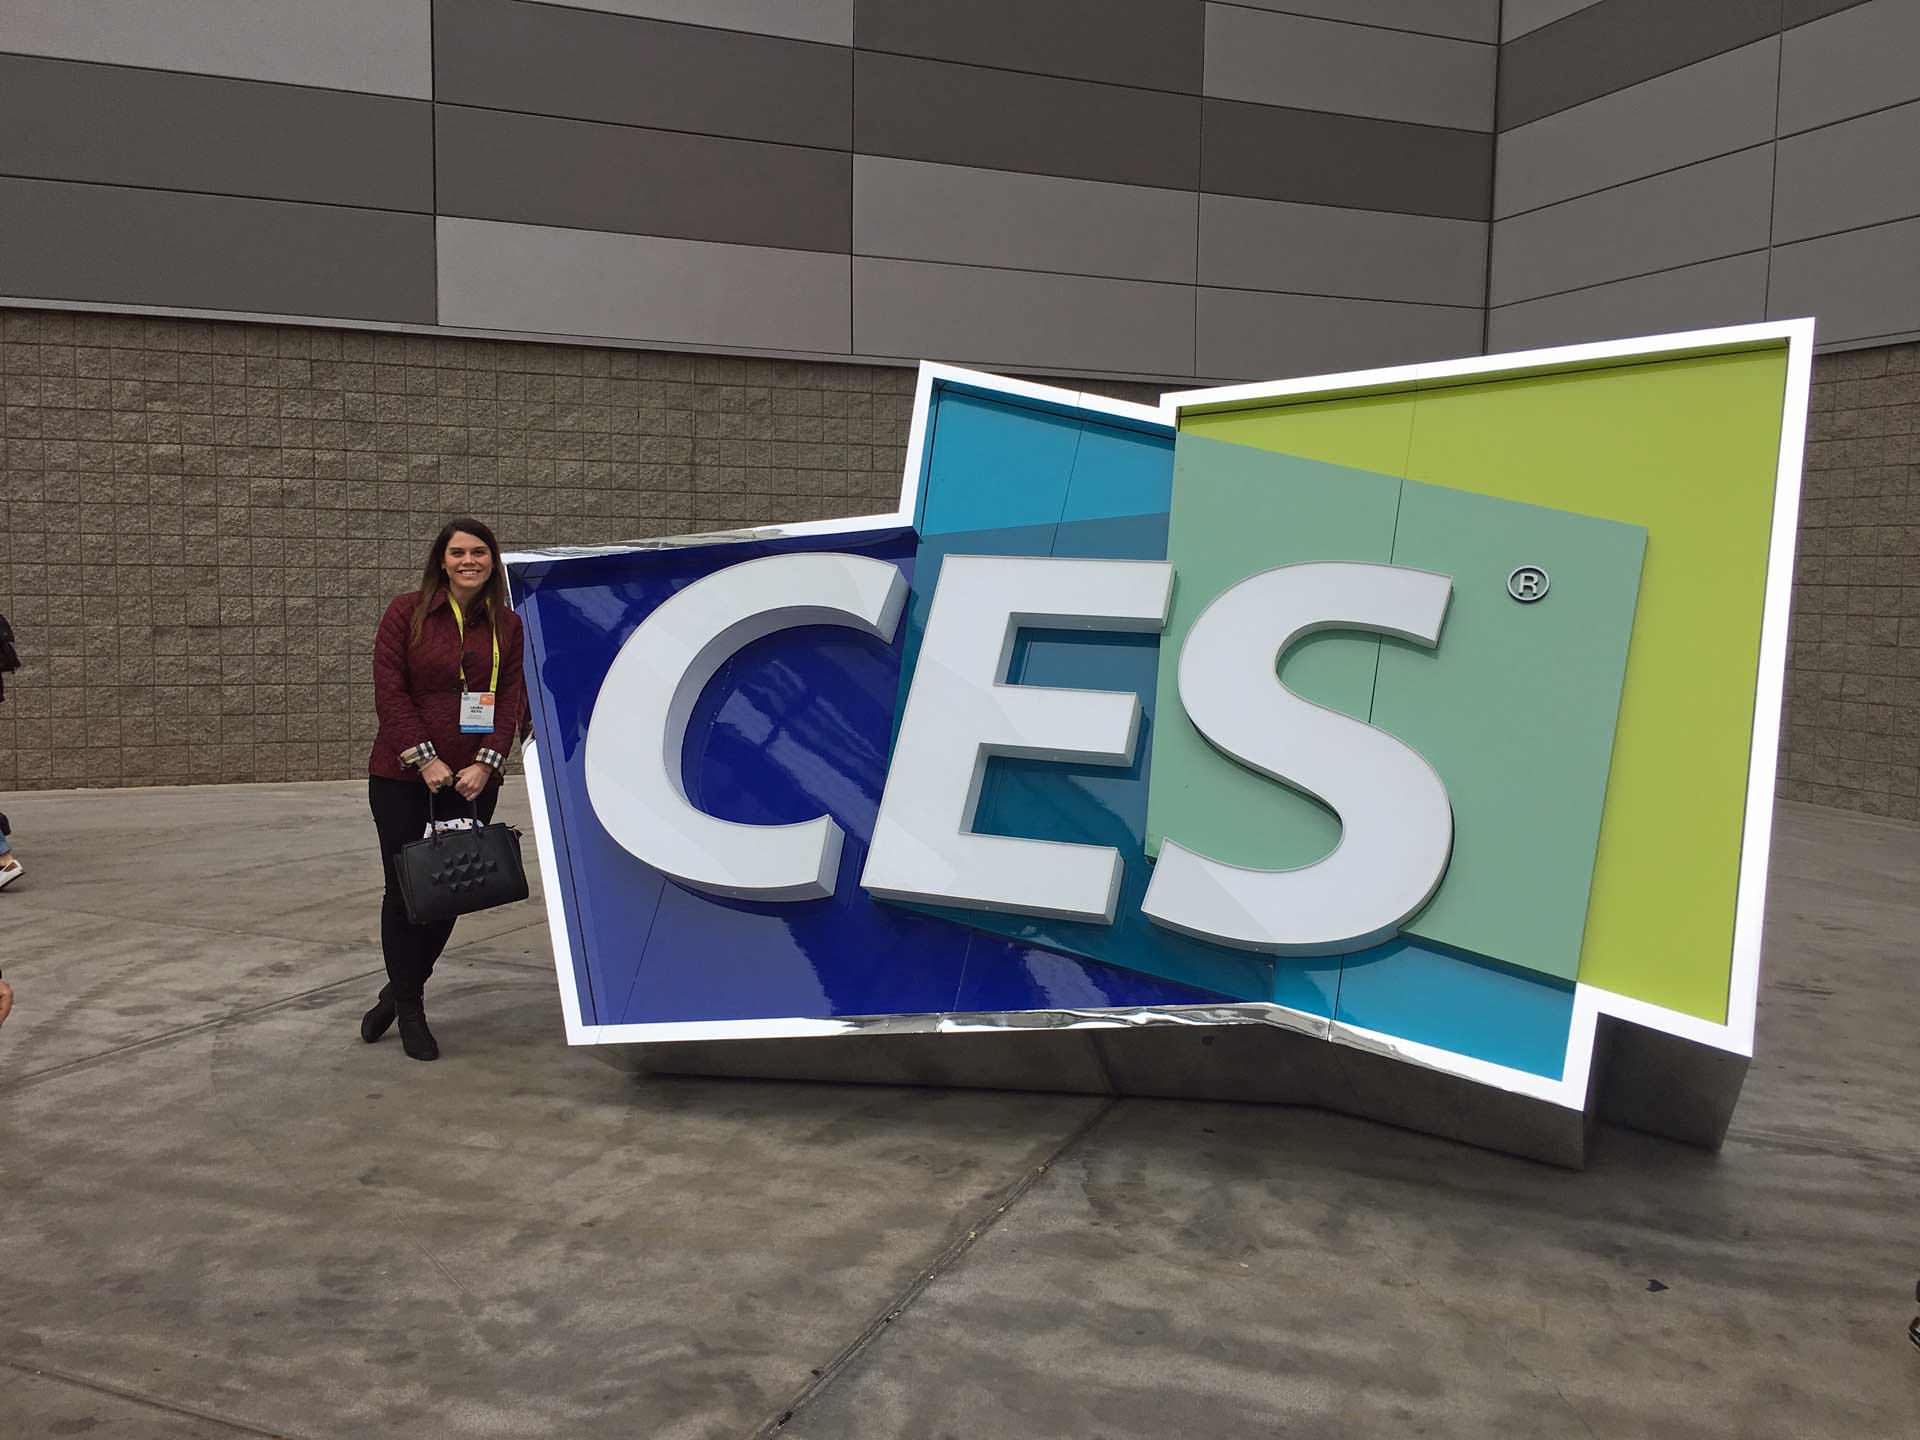 CES - Consumer Electronic Show